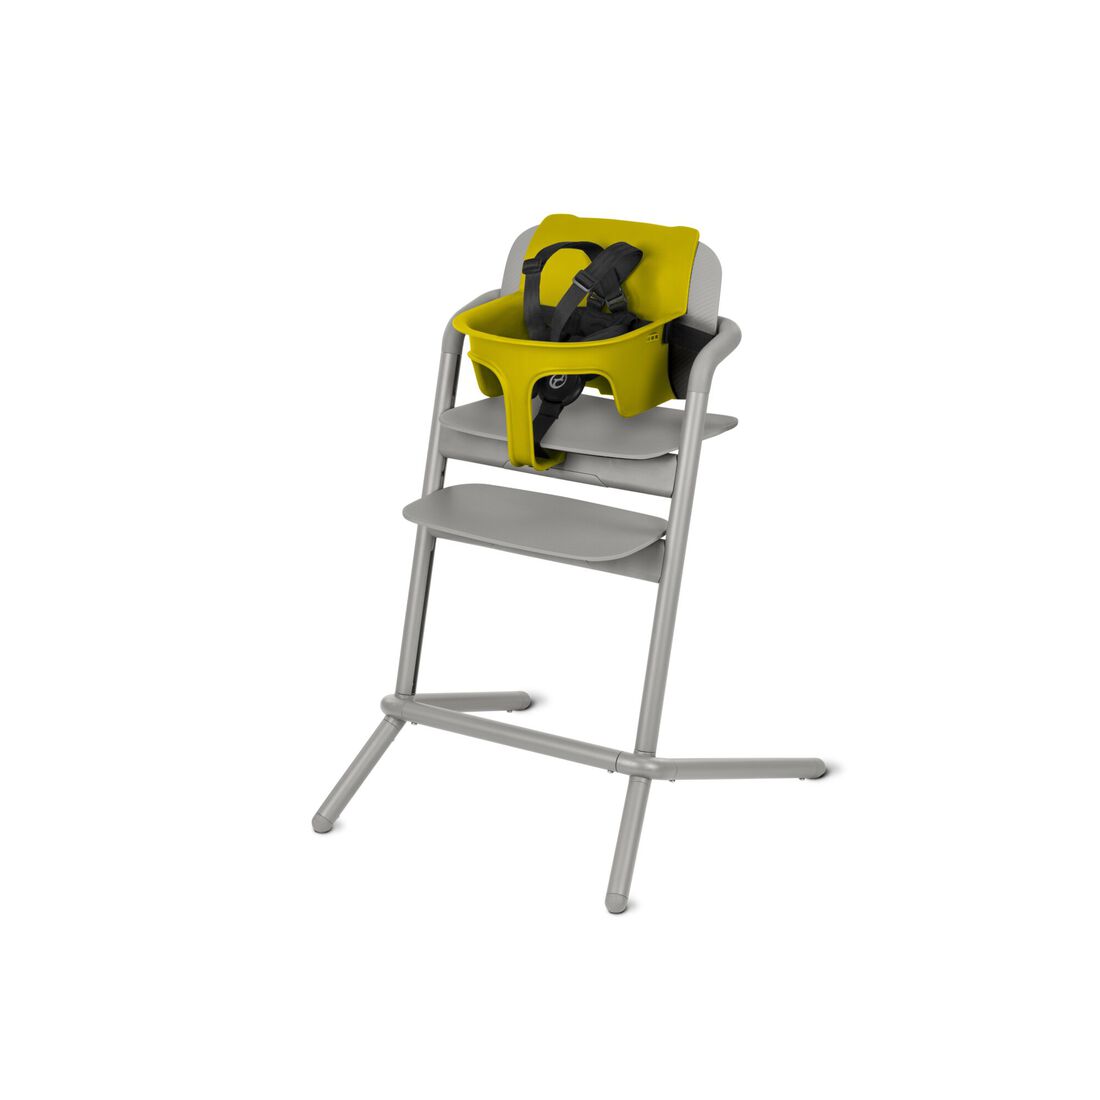 CYBEX Lemo Baby Set 2 - Canary Yellow in Canary Yellow large numéro d’image 1